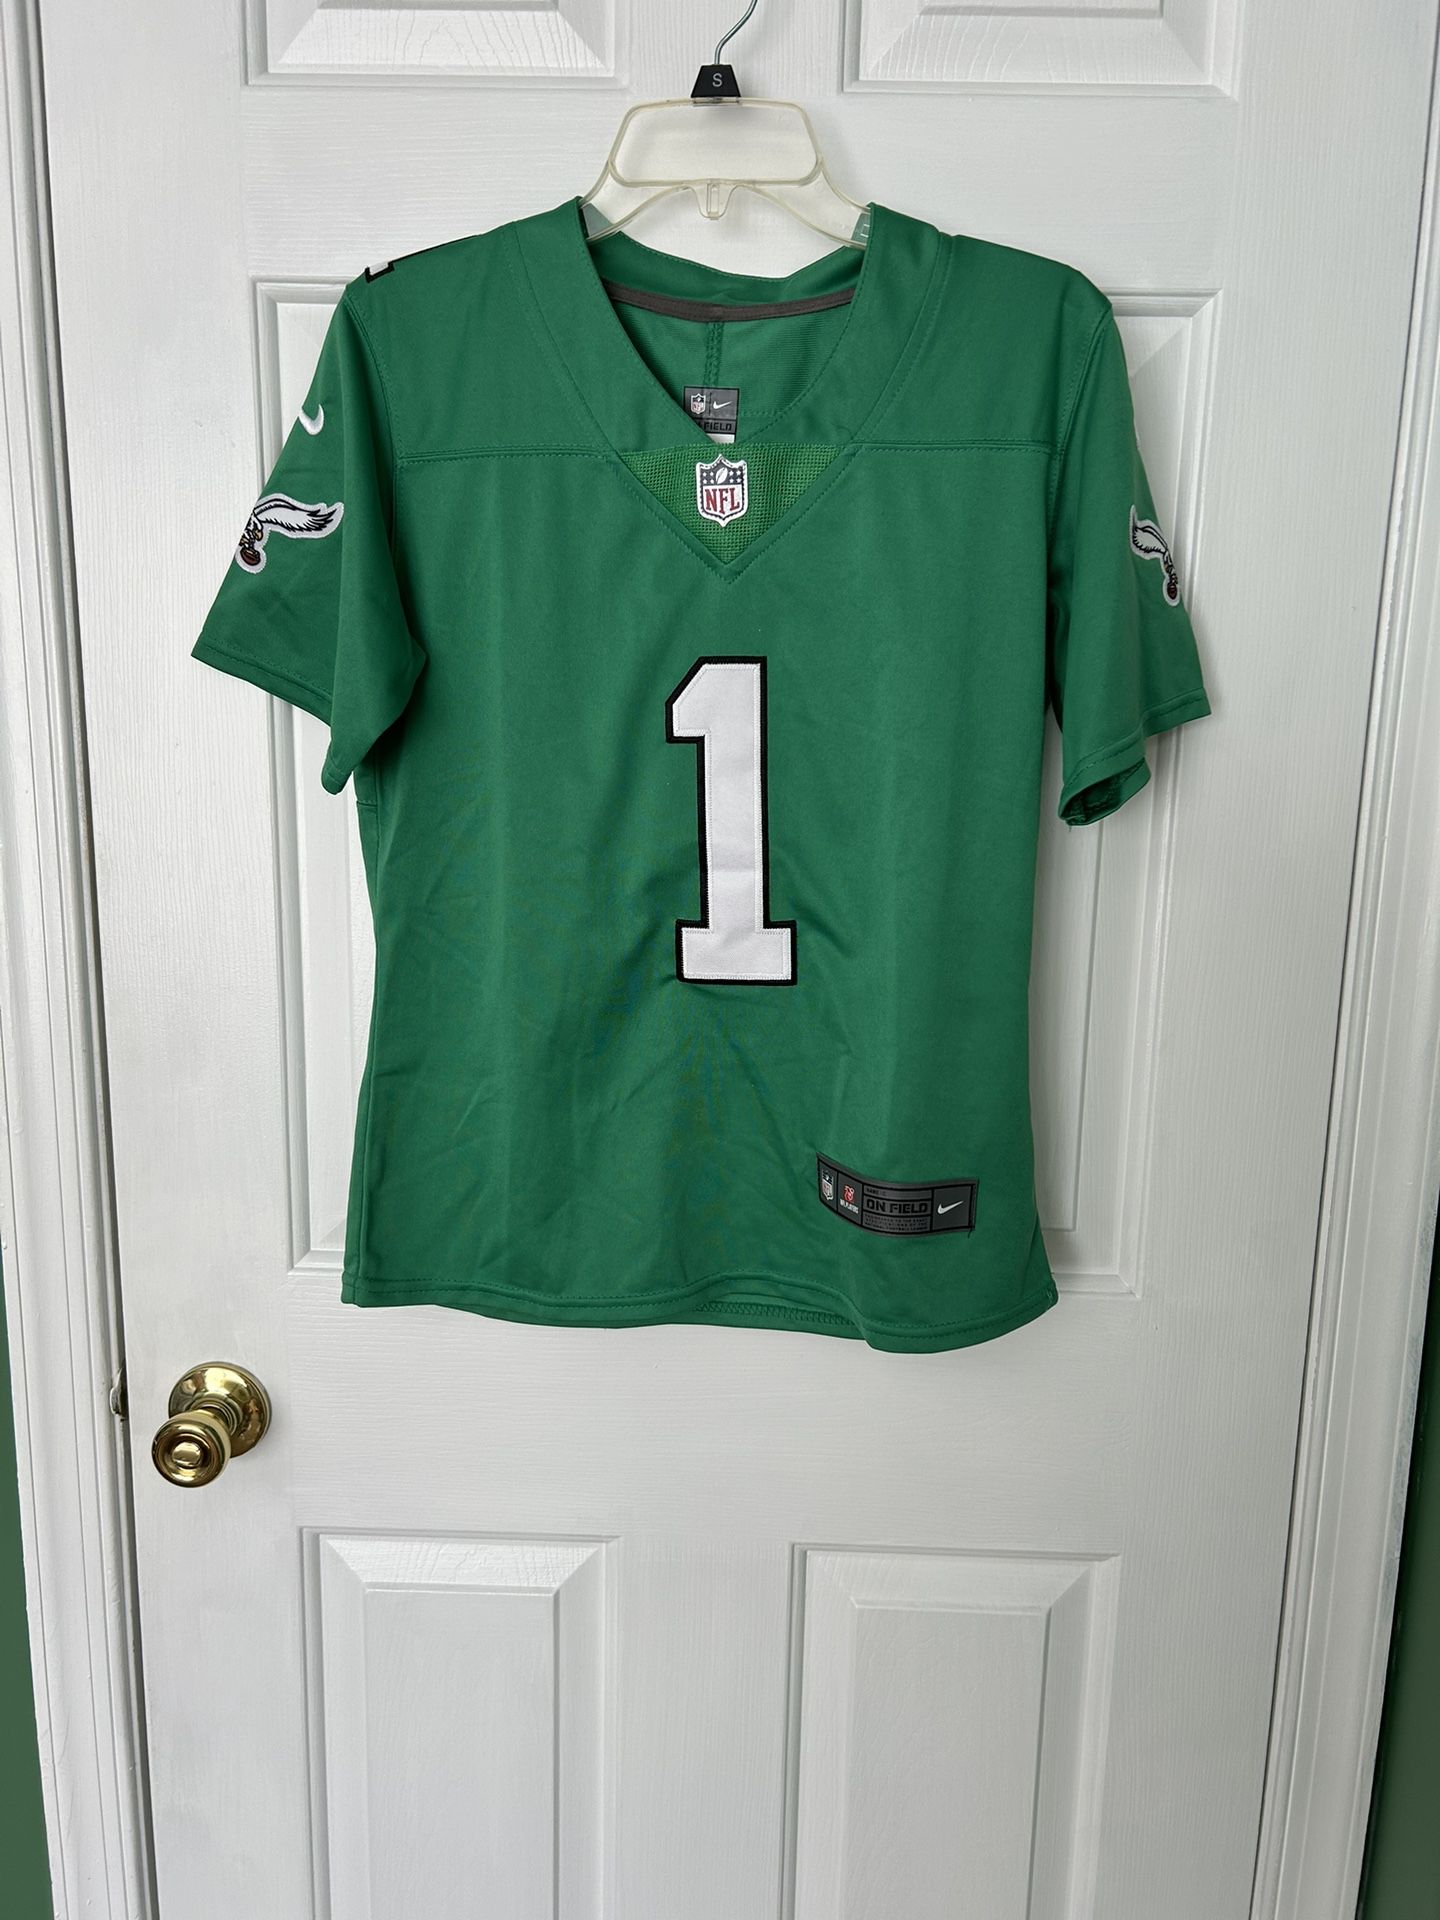 Eagles Embroidered Jersey “Hurts”